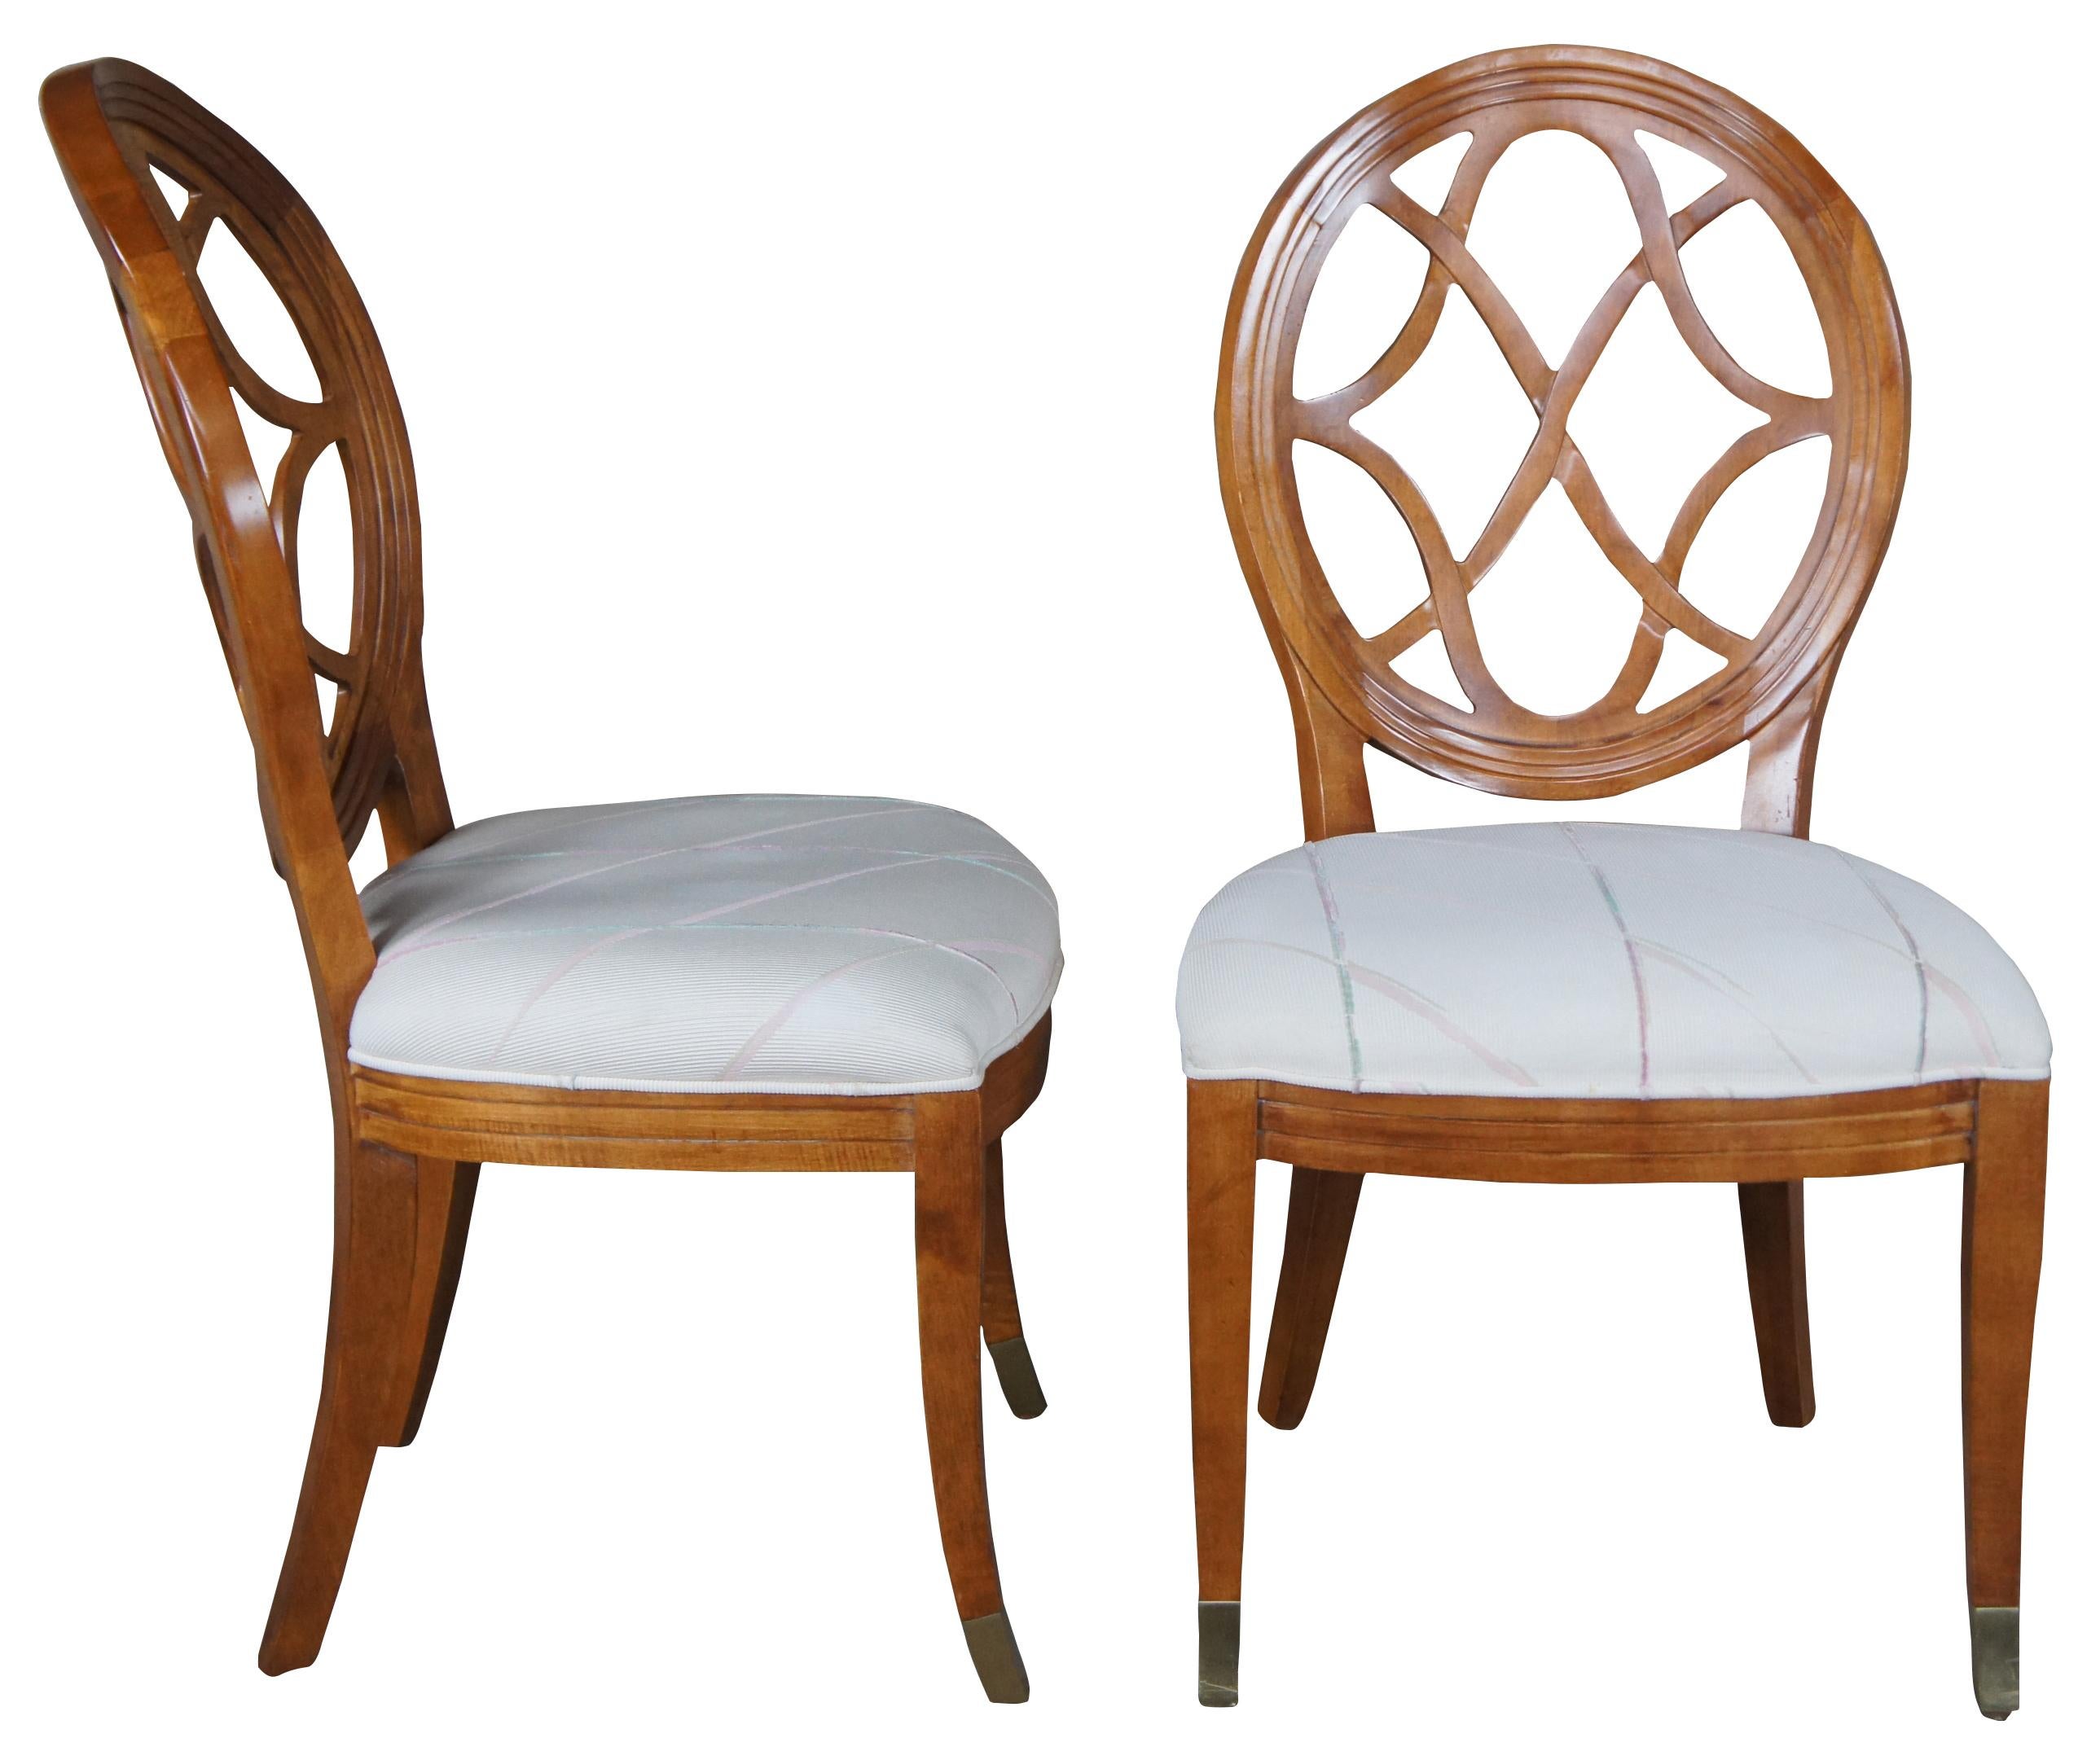 8 Vintage Century periced back side chairs 341-511, circa 1993. An oval or spoon shaped interlaced back, finished in their Maple Villadomain finish. The chairs are upholstered in a neutral fabric and supported by saber legs with brass caps.